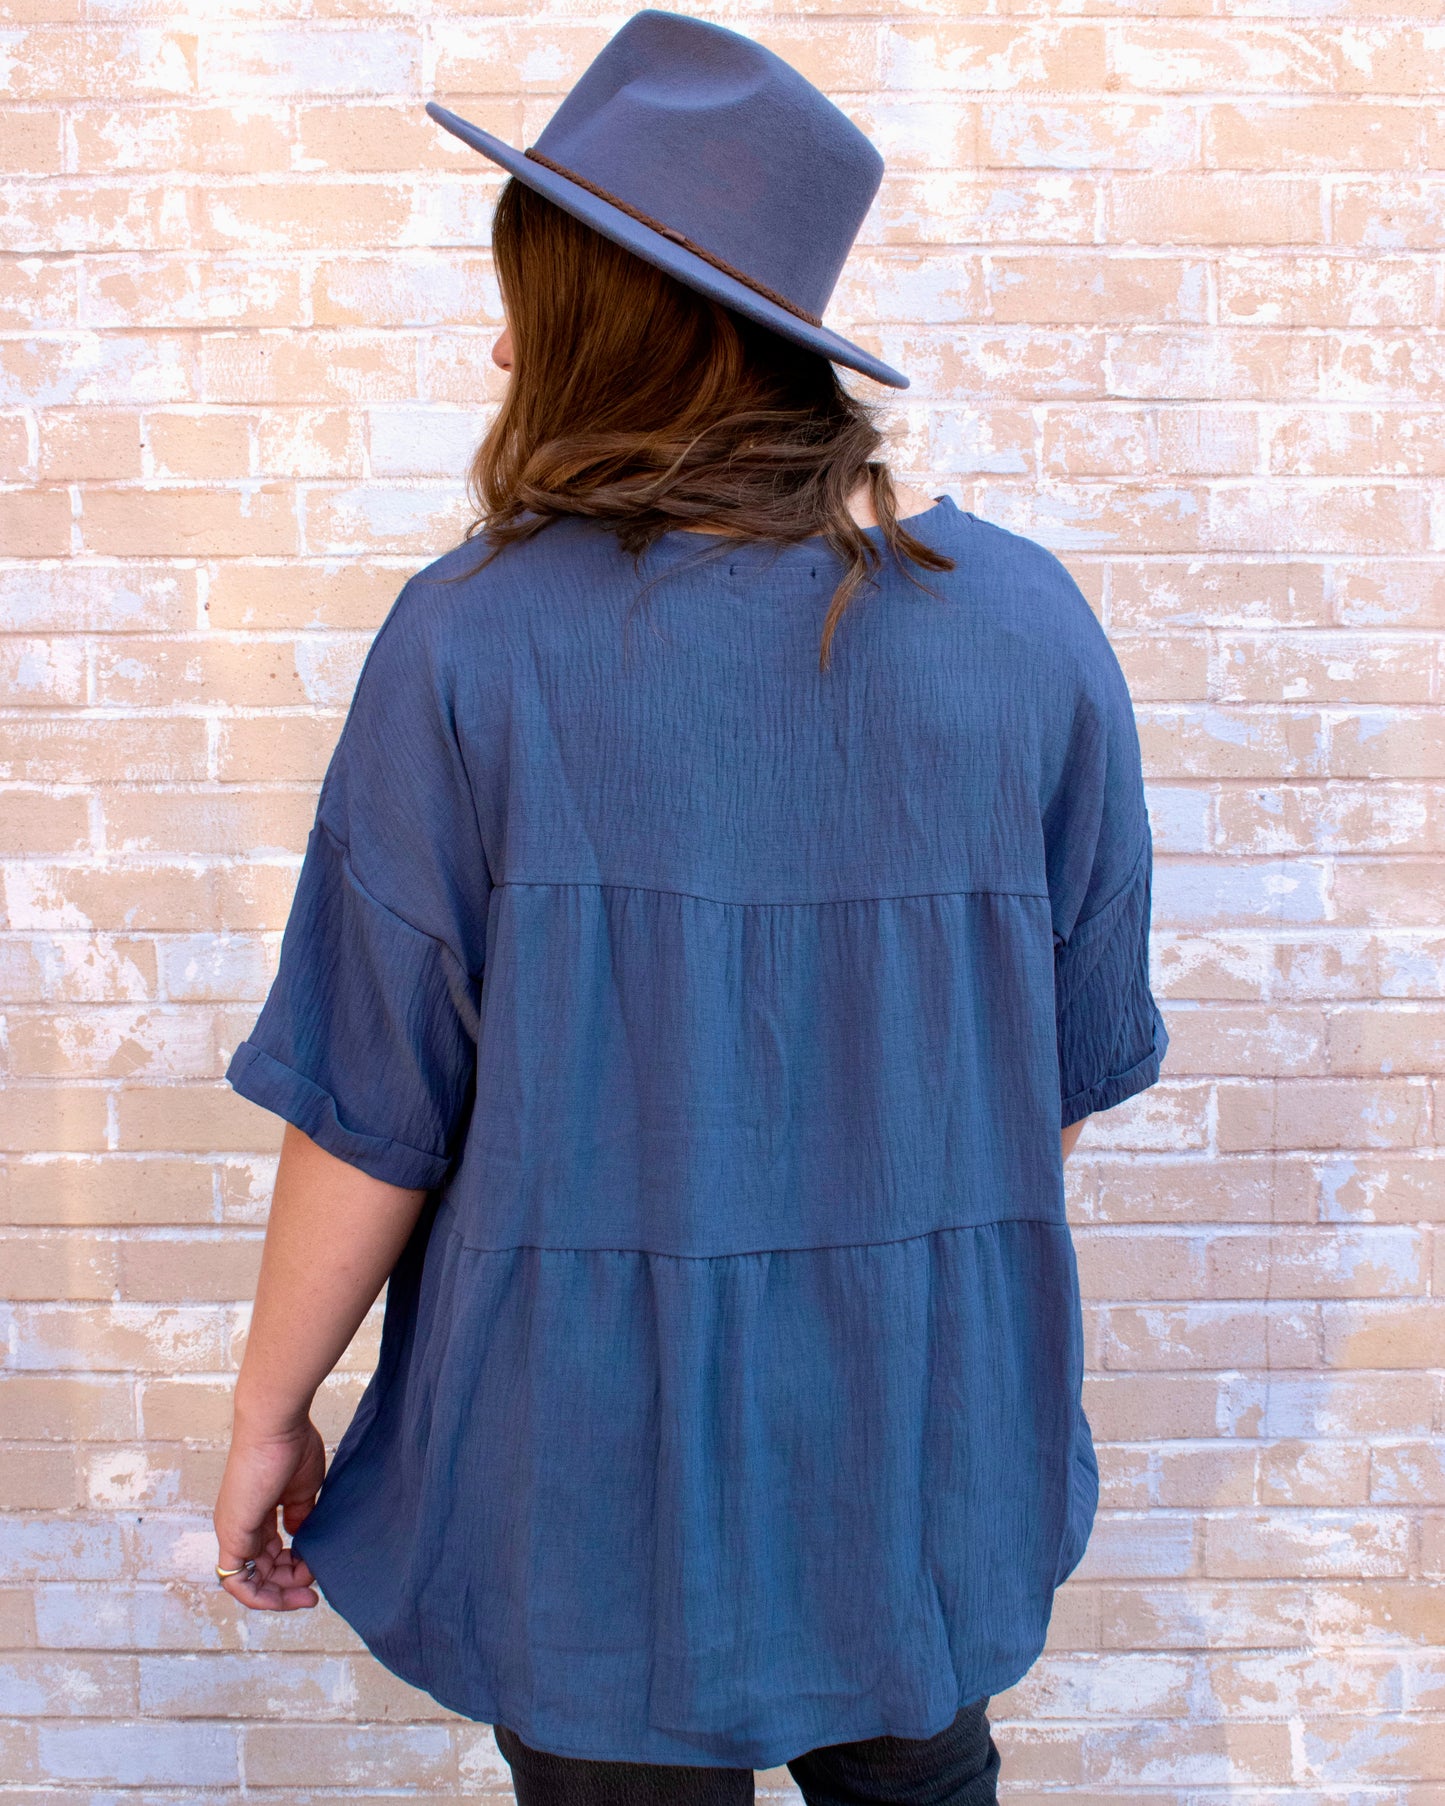 Fallin' For You Rustic Blue Top